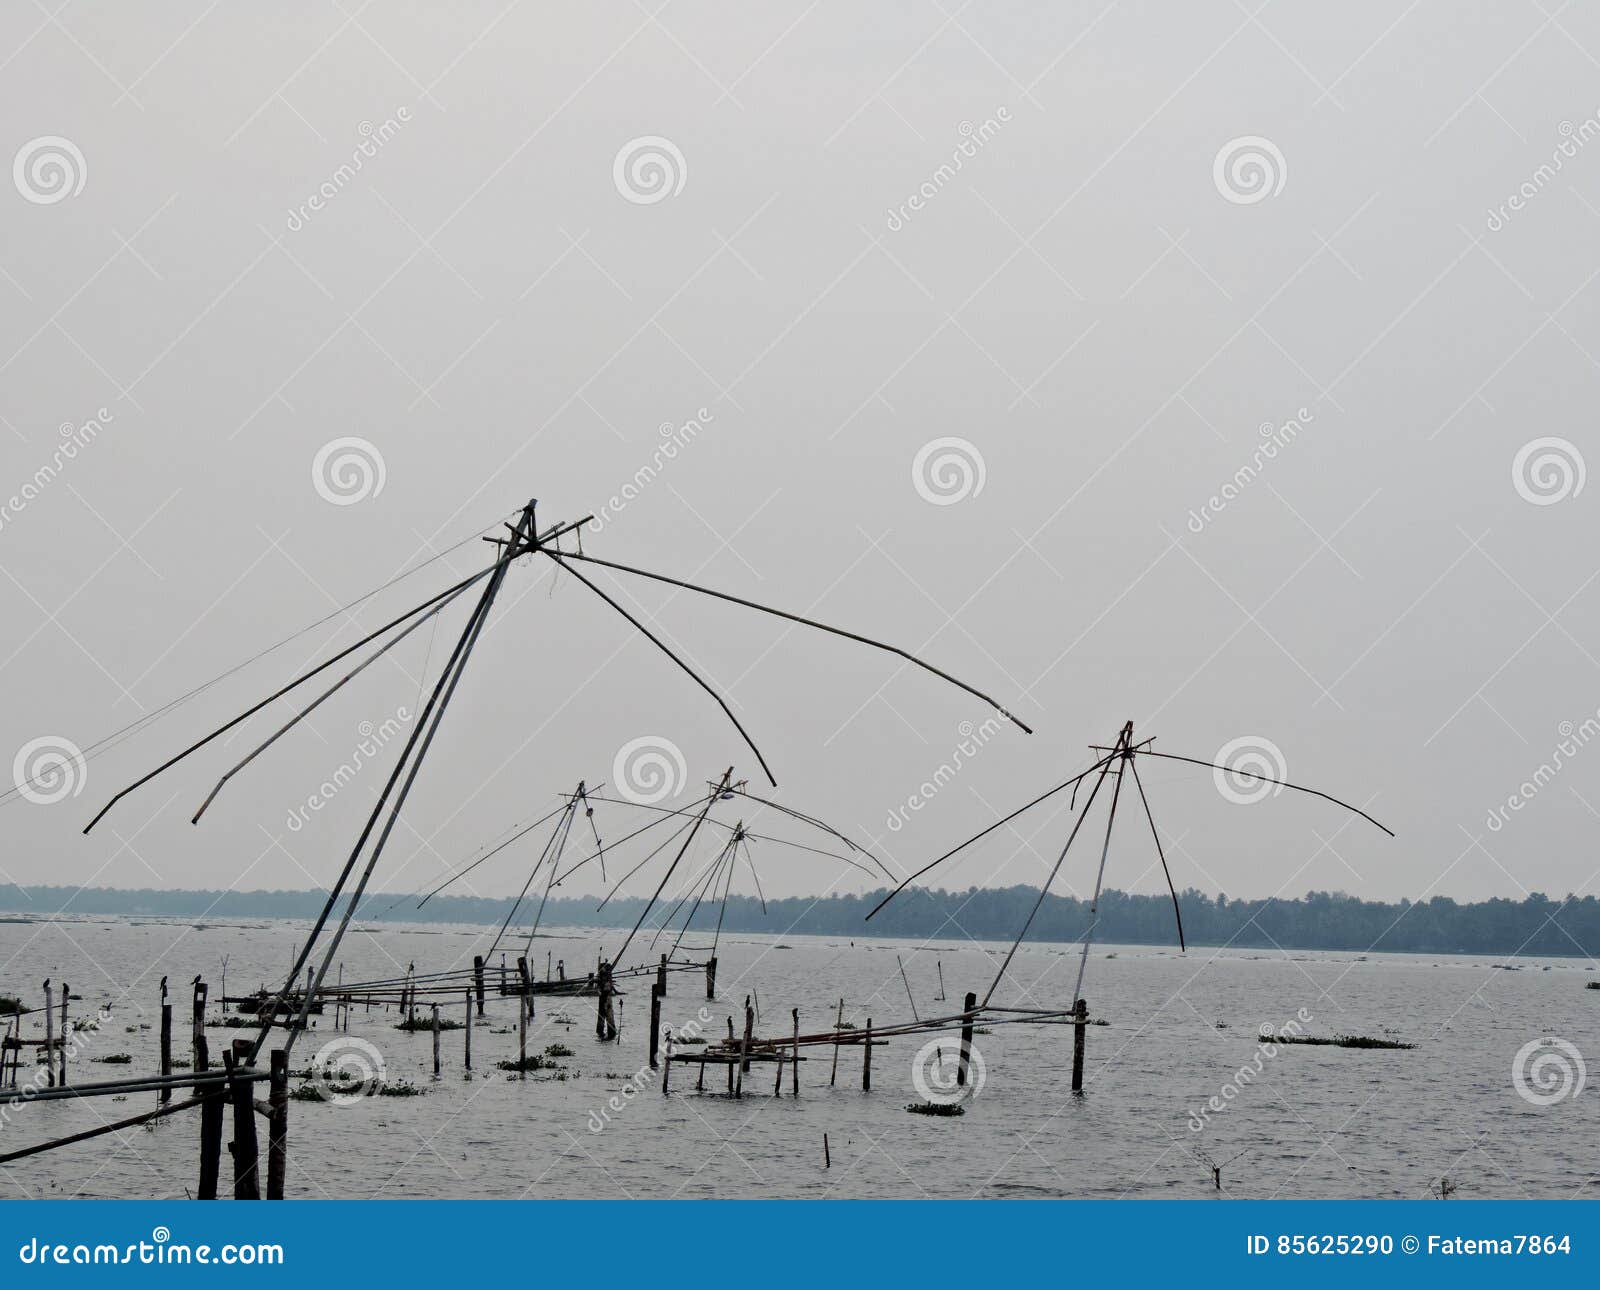 Chinese Fishing Net Poles in the Backwaters of Kerala, India Stock